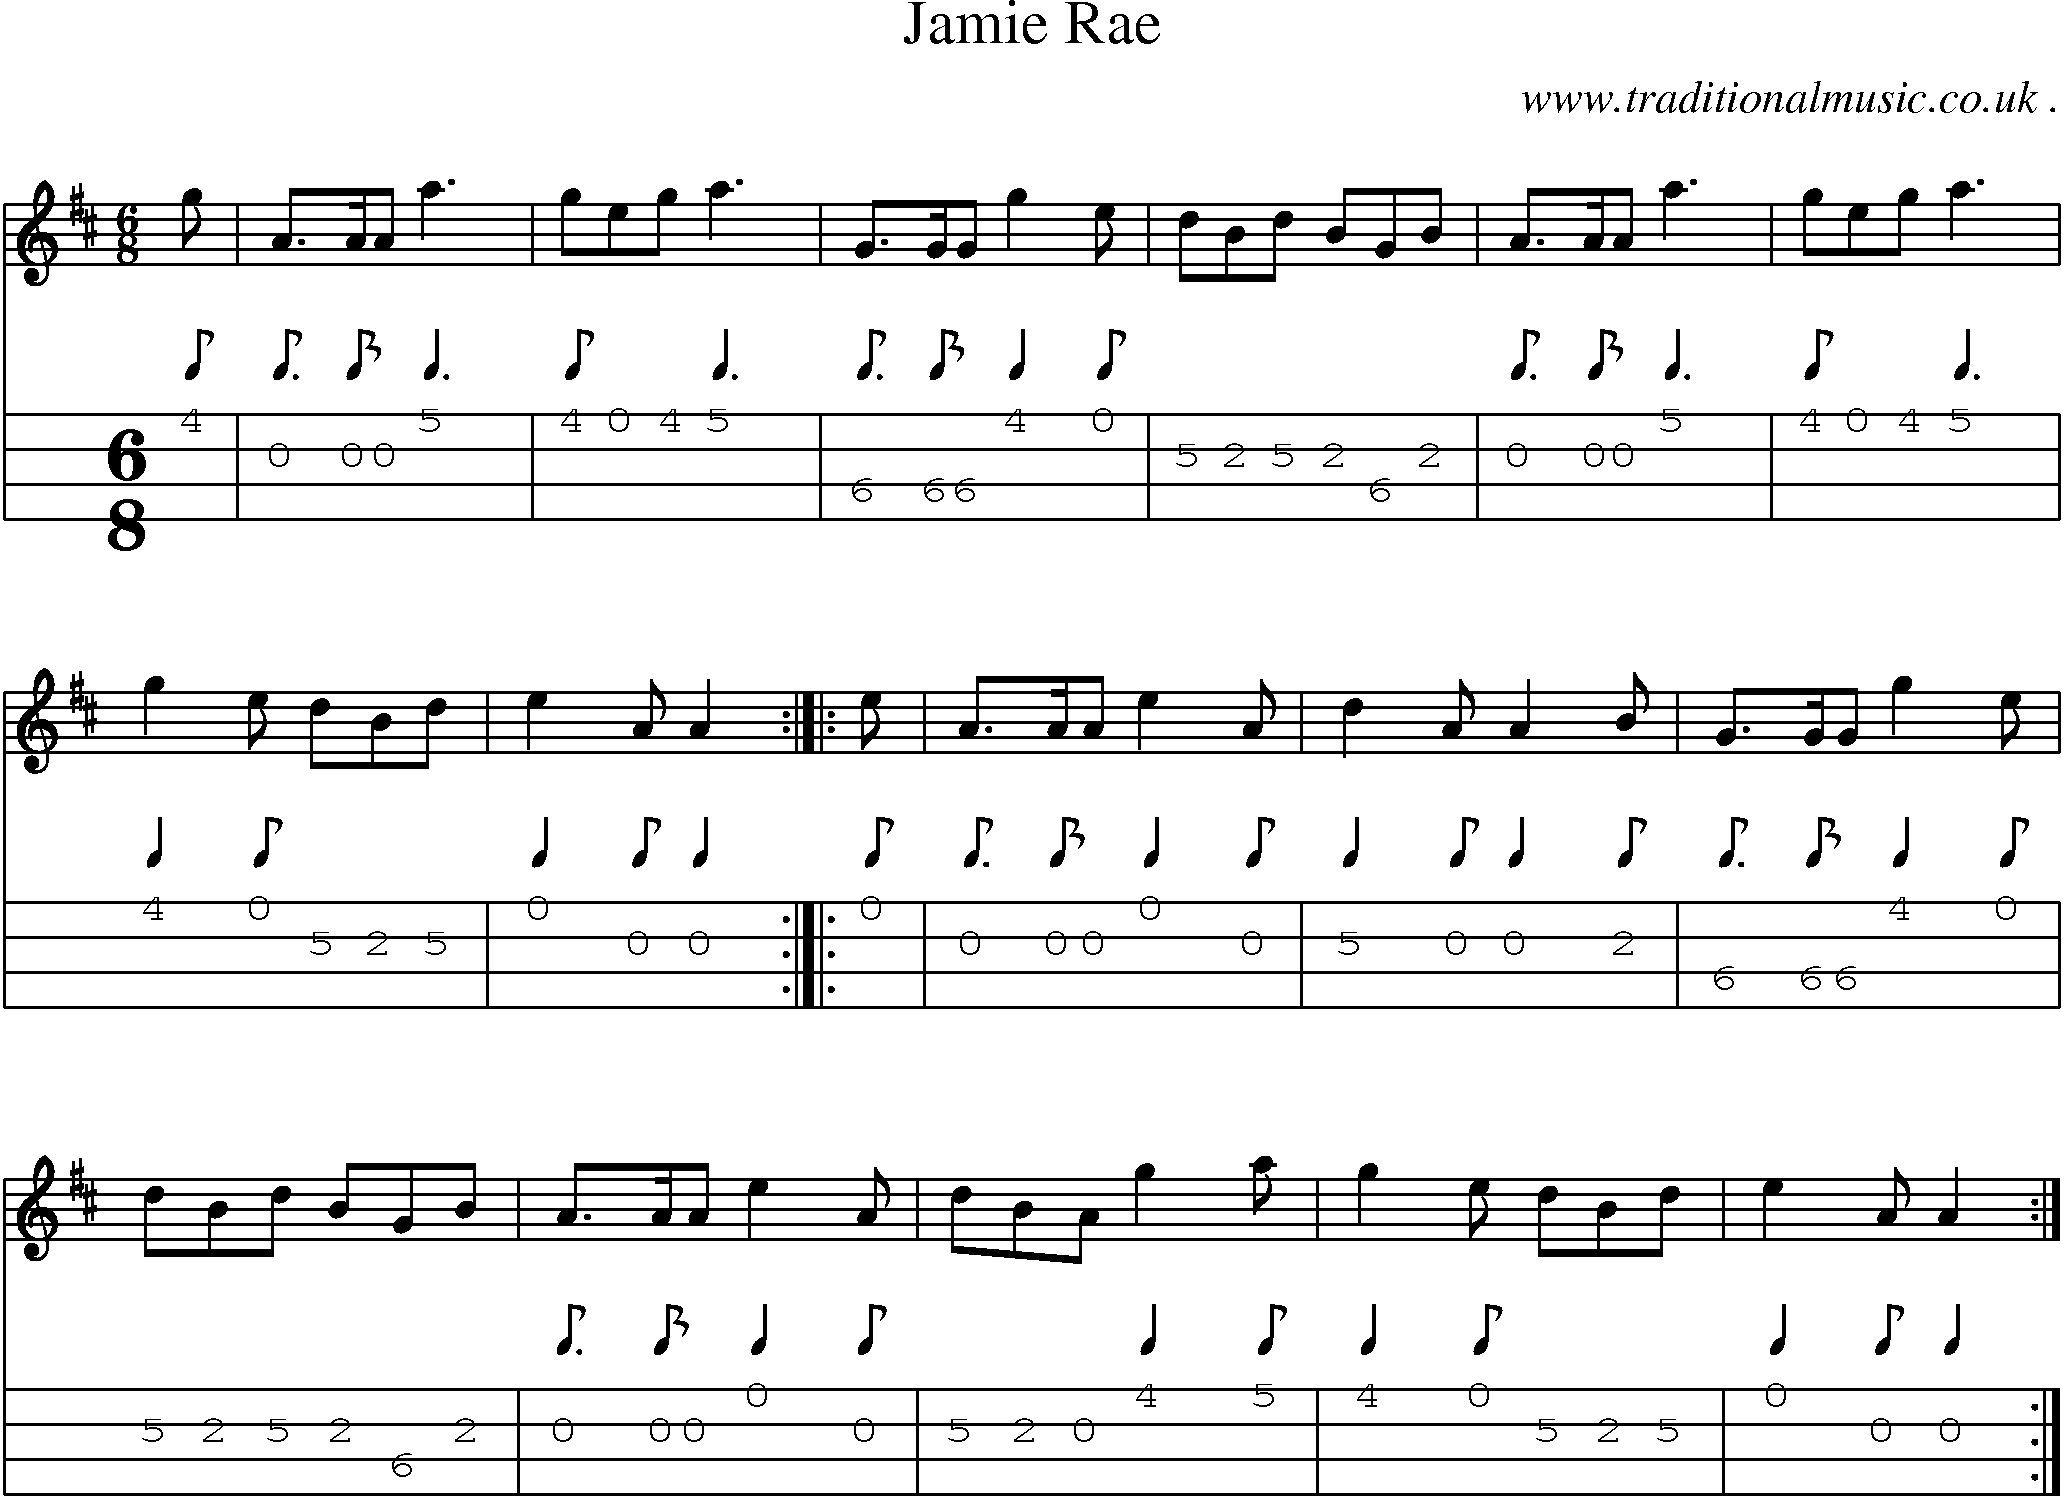 Sheet-music  score, Chords and Mandolin Tabs for Jamie Rae